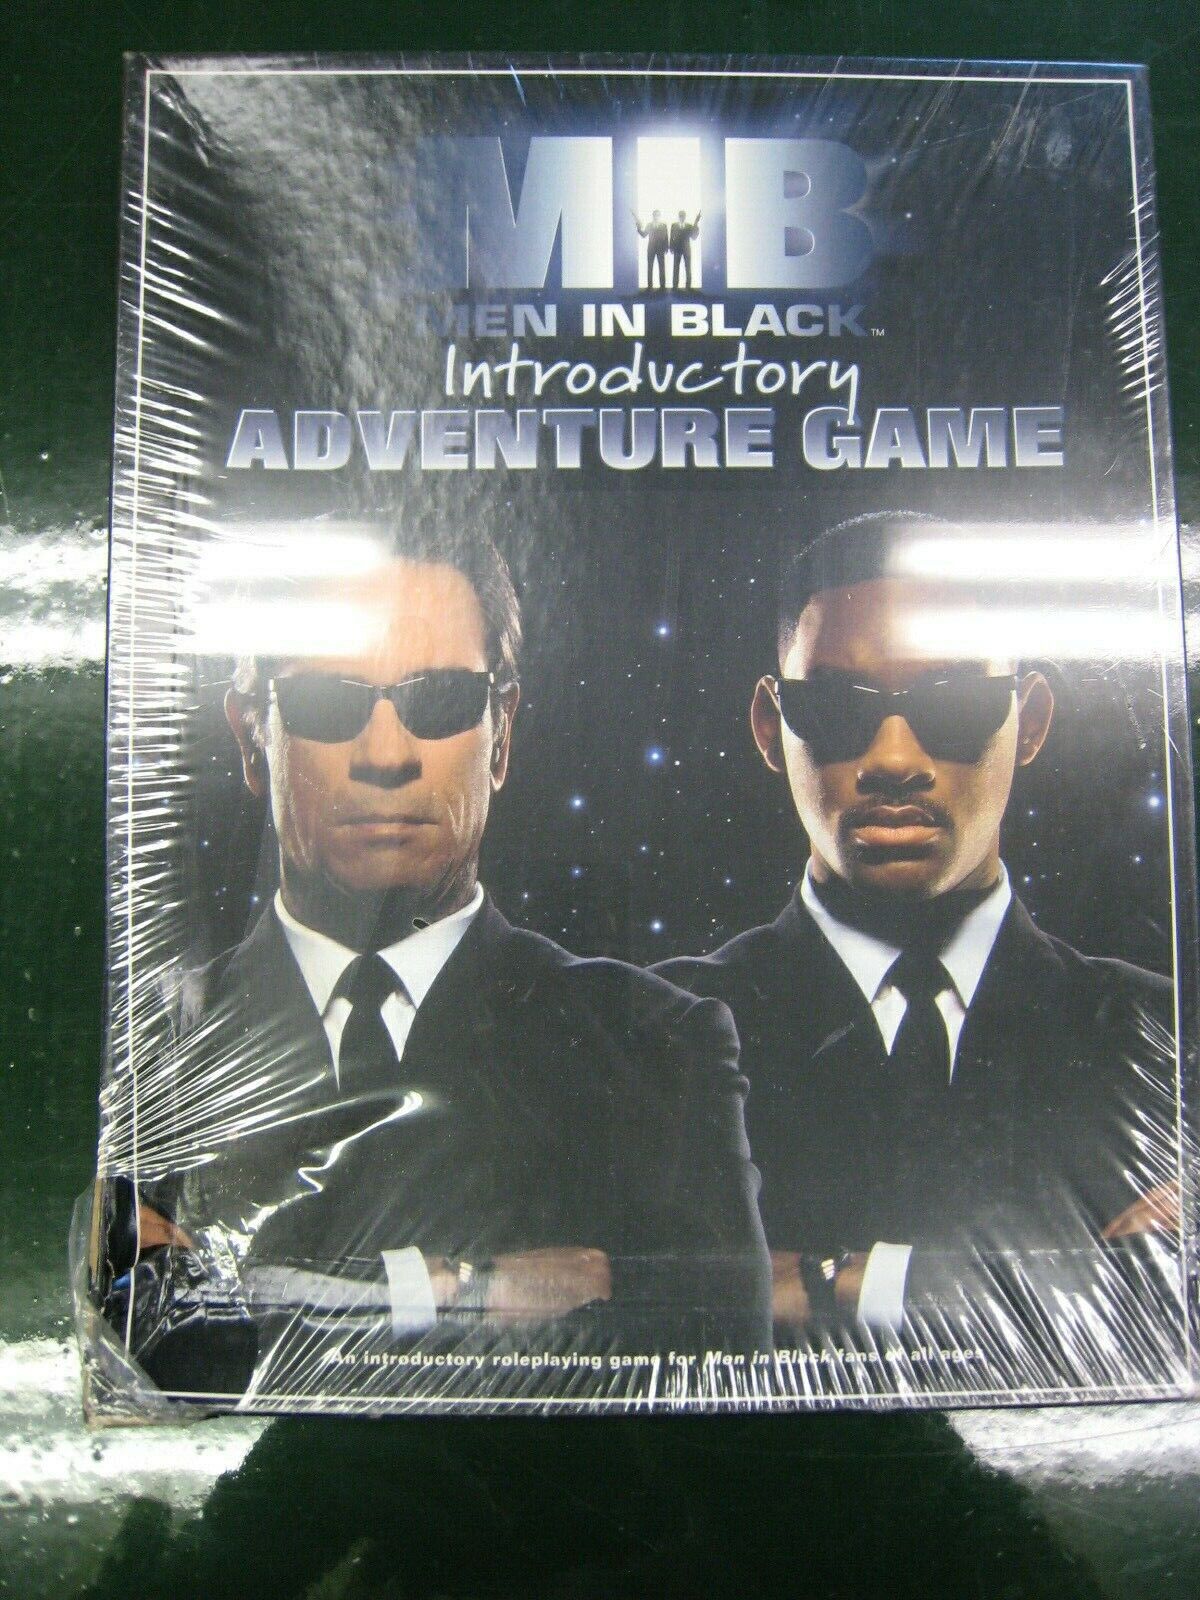 Men in Black Introductory Adventure Game New Sealed West End Games